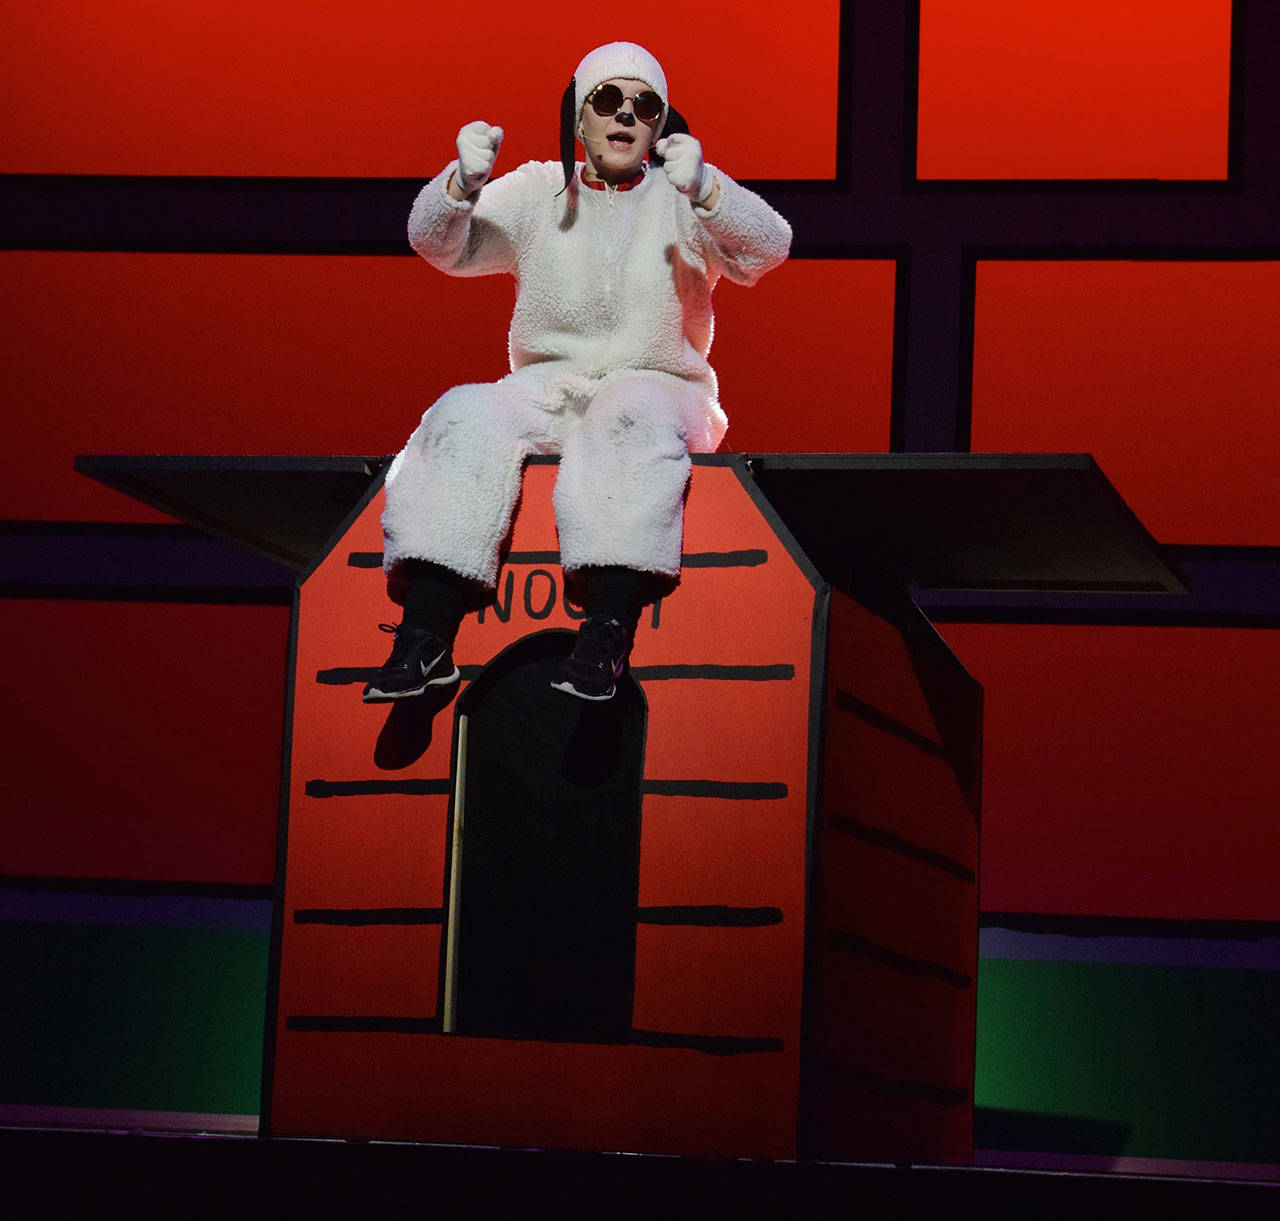 Isabel Haddon as Snoopy performs on stage during the Auburn cast’s performance of “You’re a Good Man Charlie Brown.” RACHEL CIAMPI, Auburn Reporter